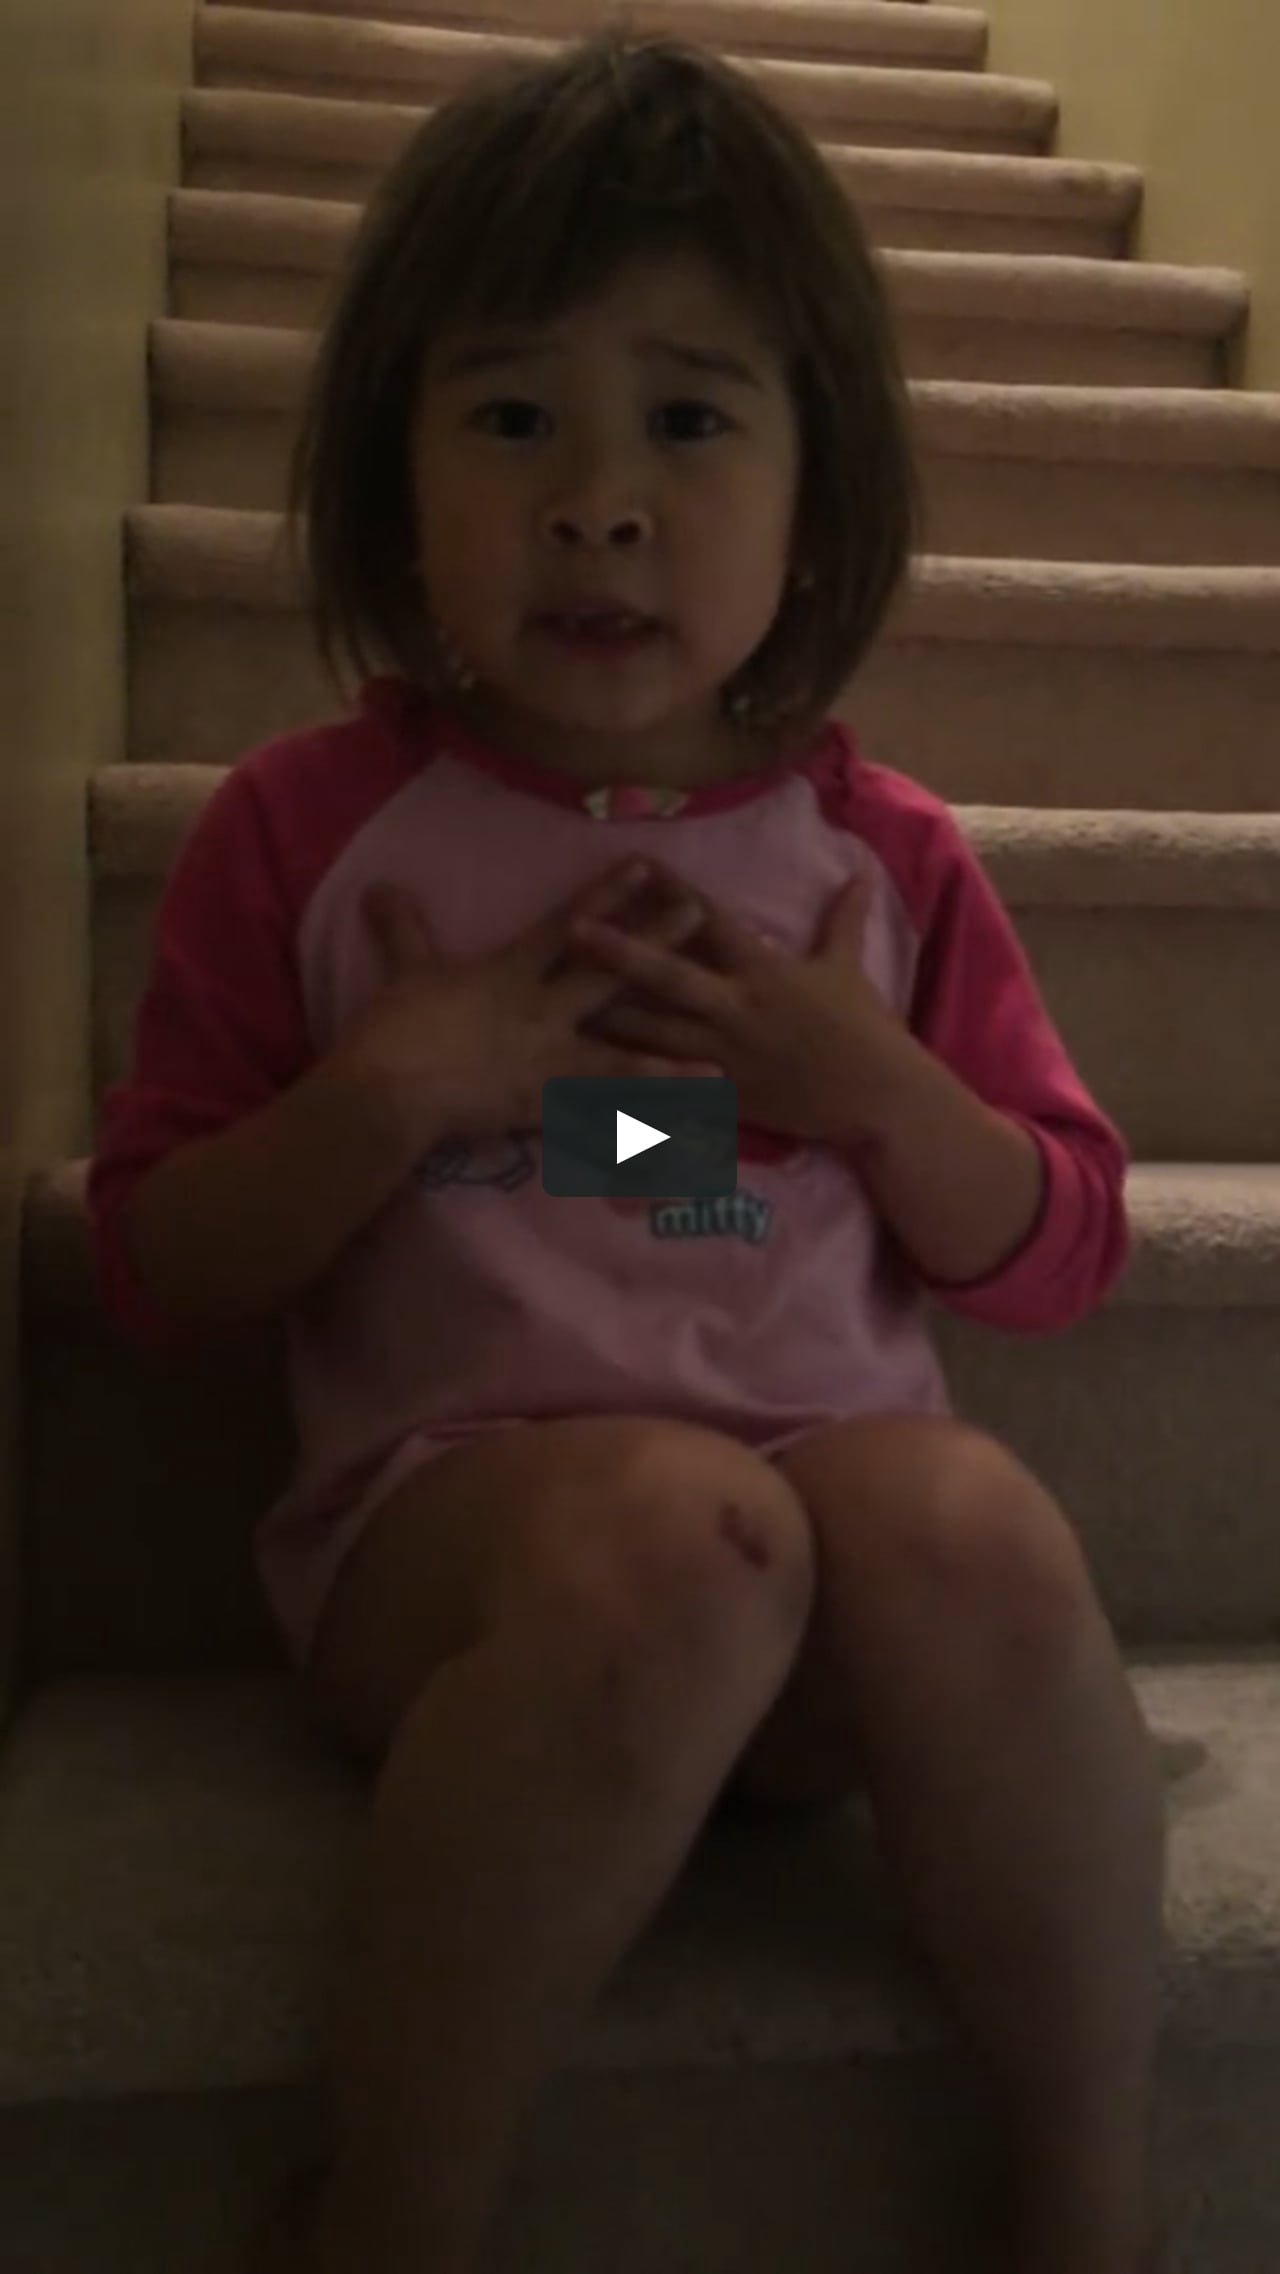 a-6-year-old-girl-talks-about-being-nice-to-each-other-mp4-on-vimeo